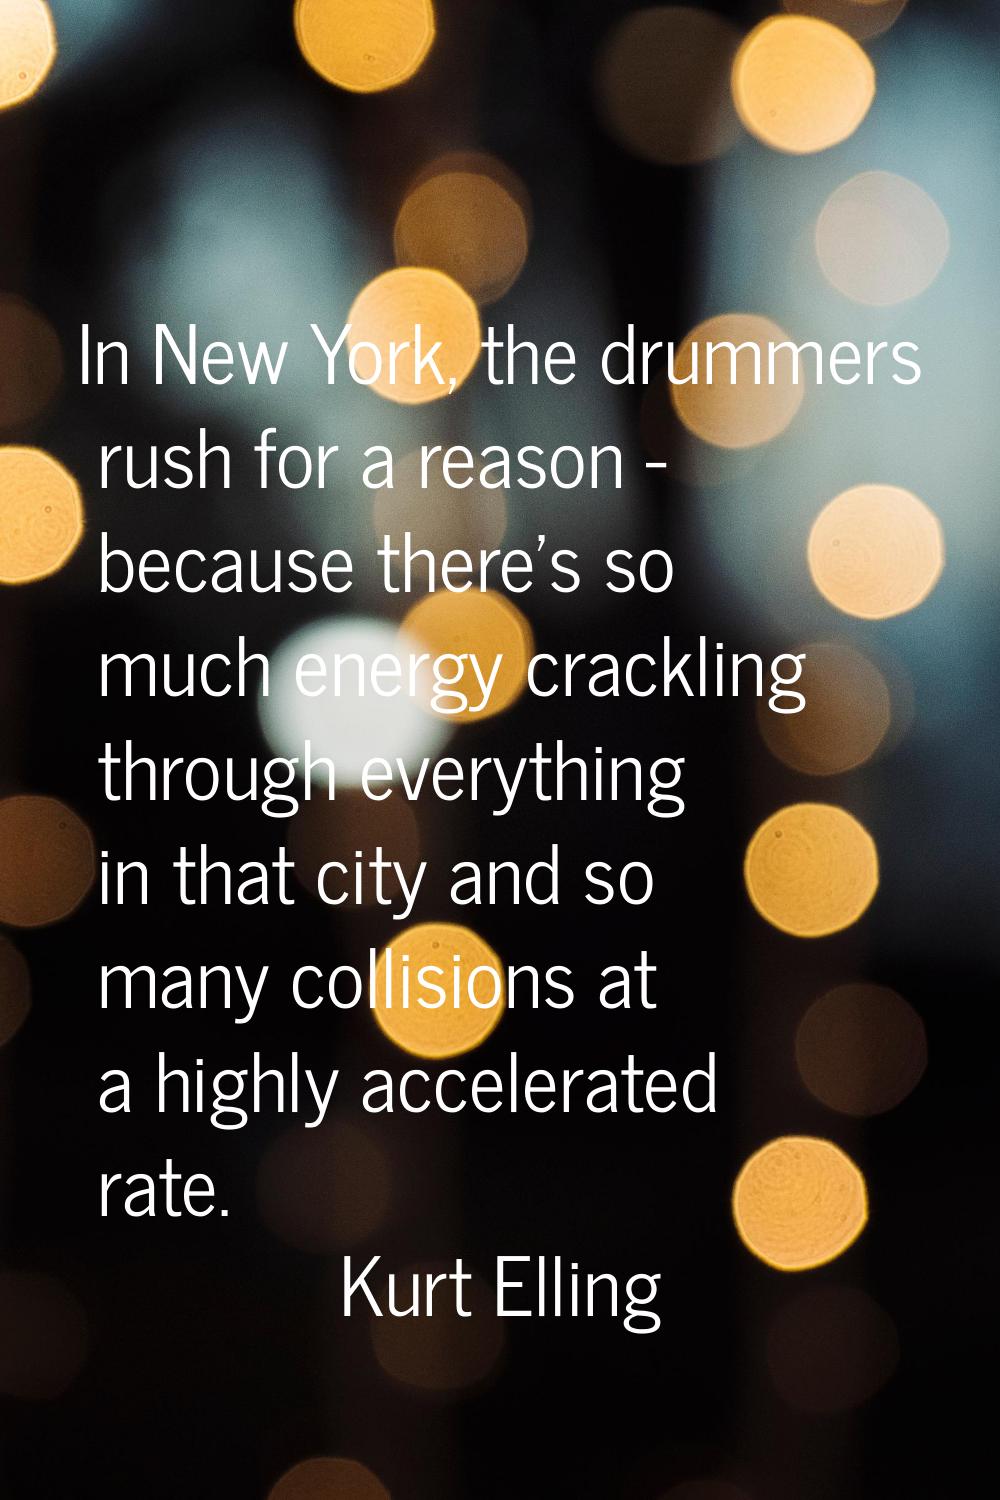 In New York, the drummers rush for a reason - because there's so much energy crackling through ever